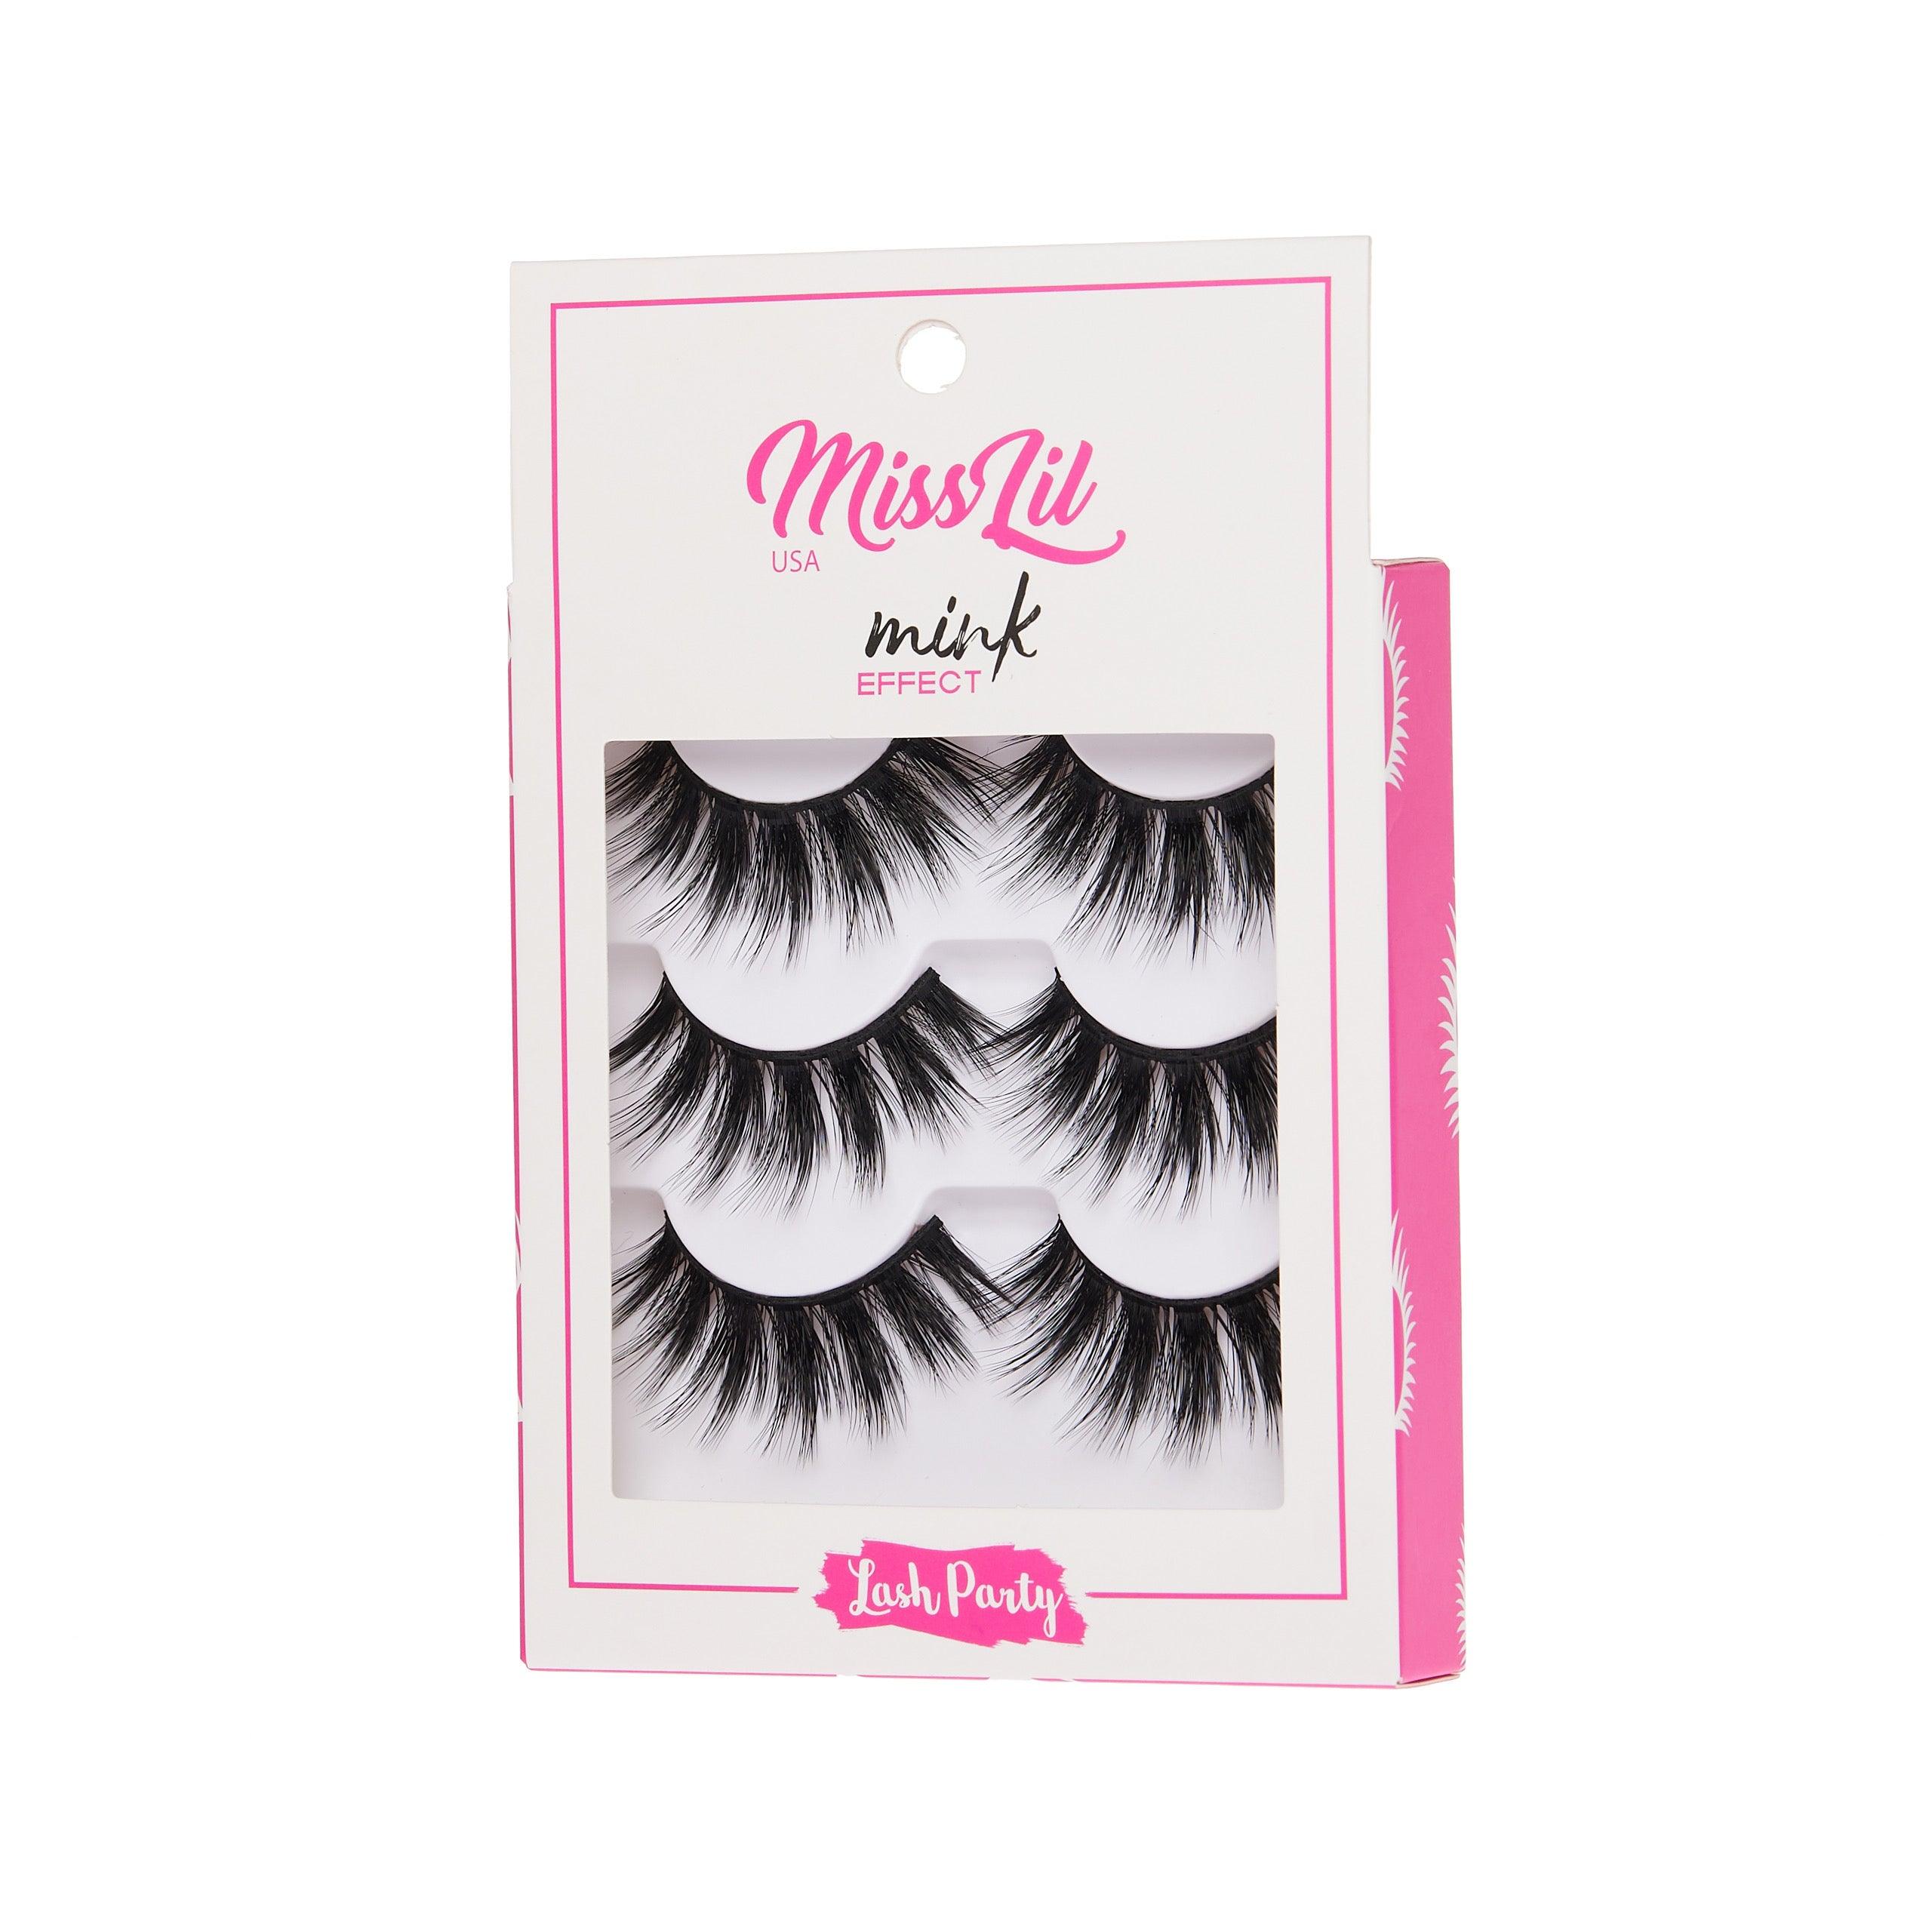 3-Pair Faux Mink Effect Eyelashes - Lash Party Collection #22 - Pack of 3 - Miss Lil USA